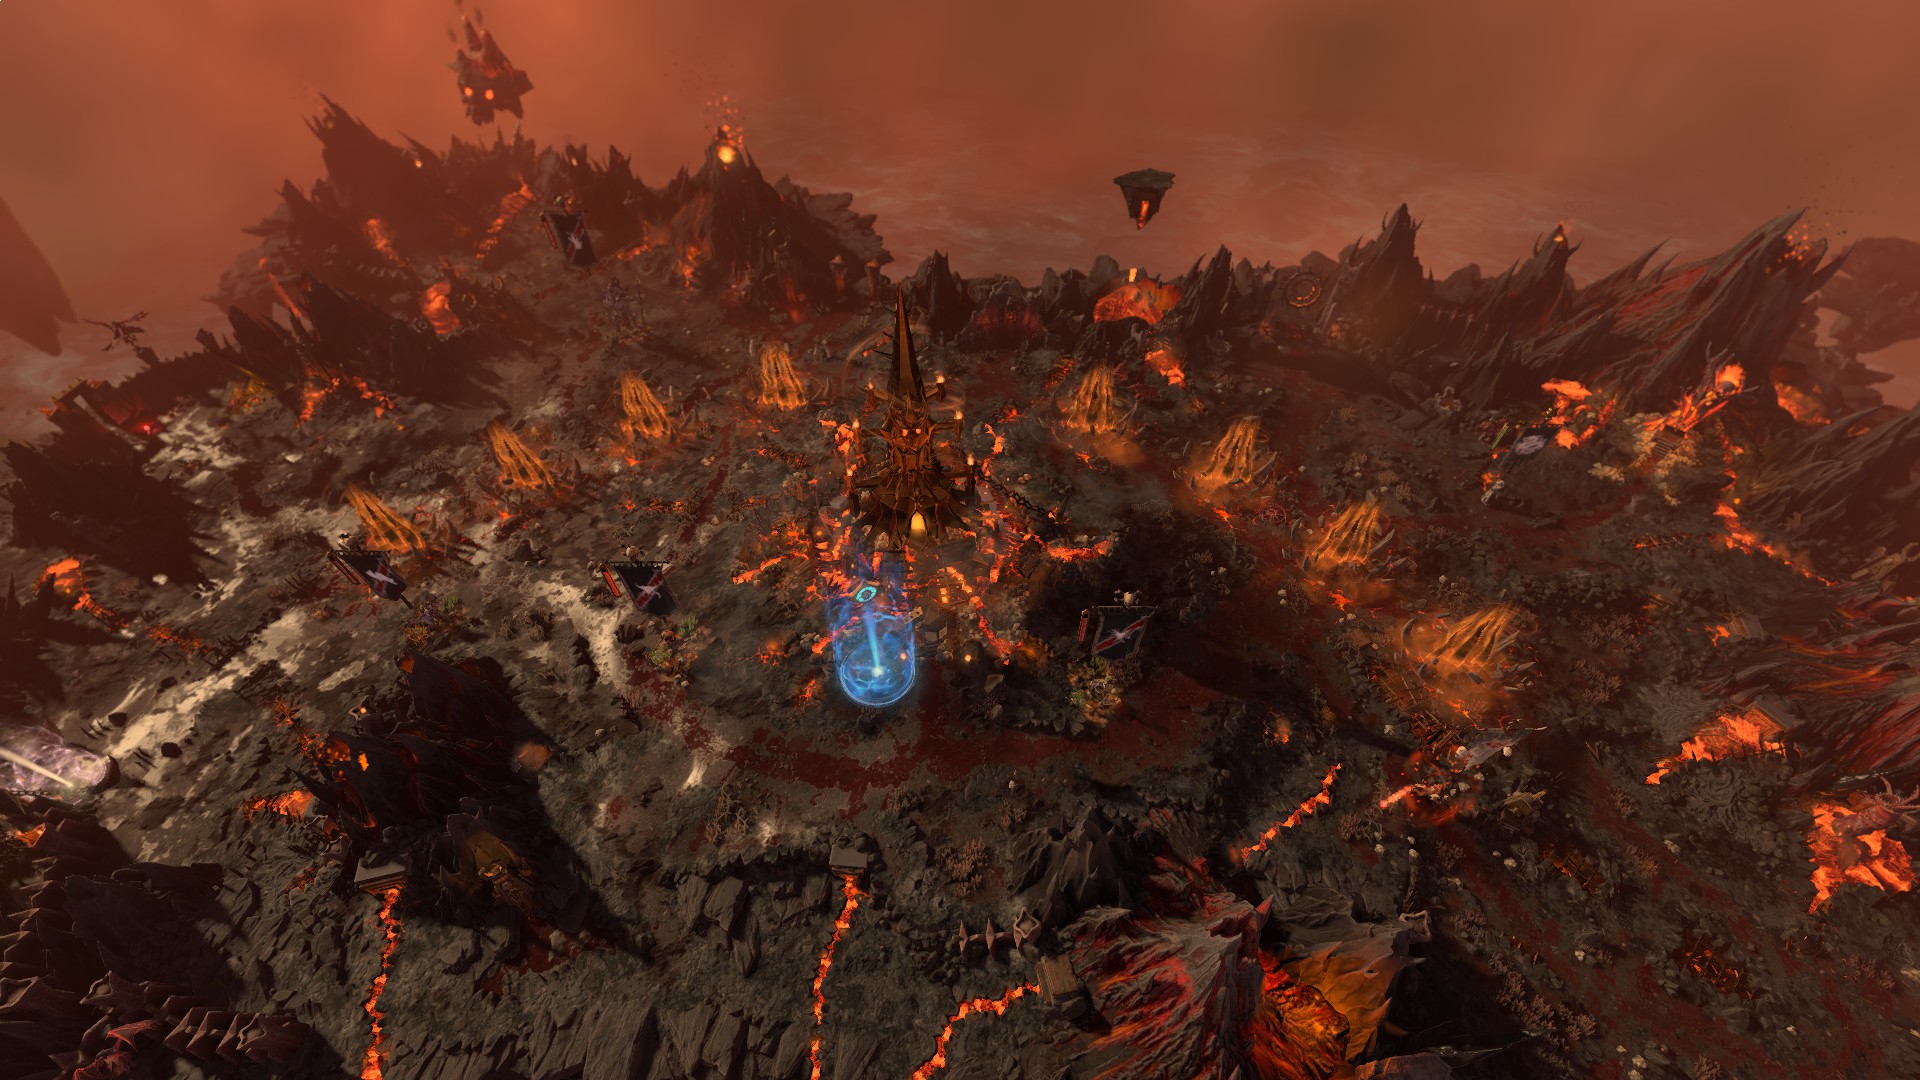 Khorne's Chaos realm in Total War: Warhammer 3